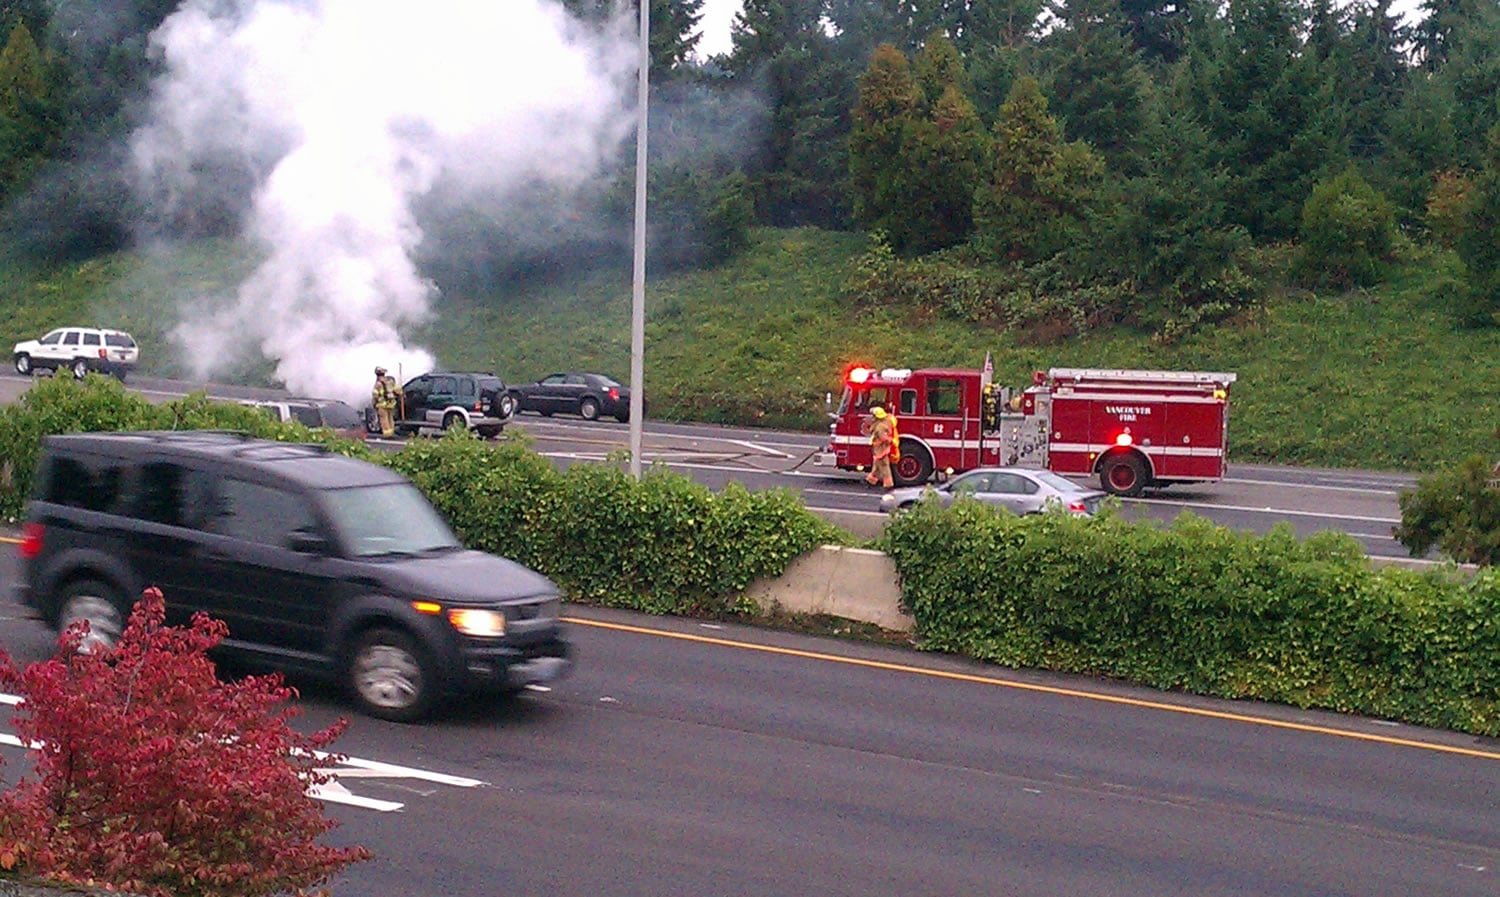 Vancouver firefighters tend to a burning SUV along Interstate 5 Sunday evening.